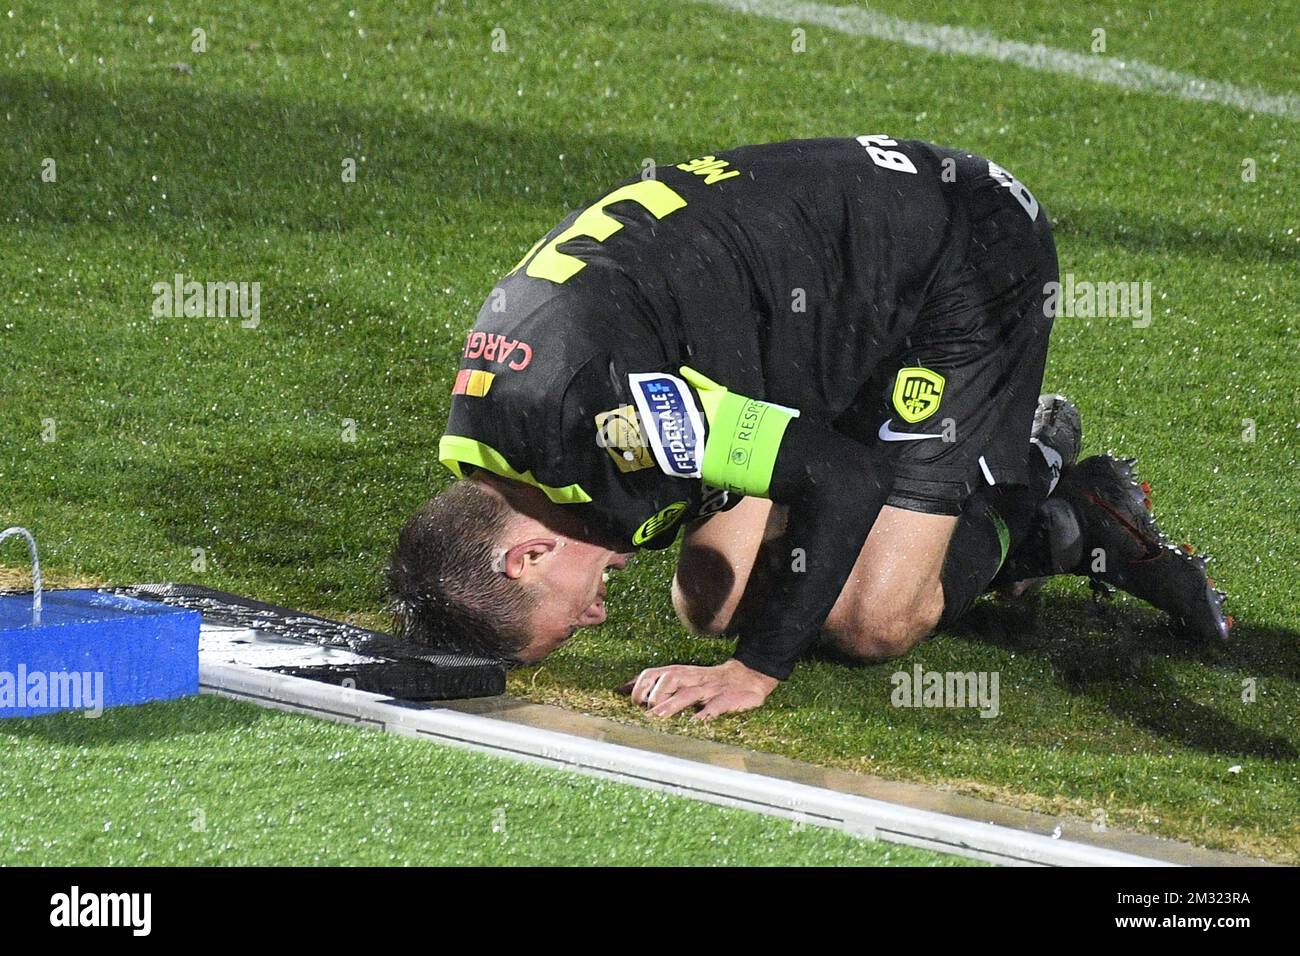 Genk's Joakim Maehle Pedersen lies injured on the ground during a friendly soccer match between KRC Genk and Hungarian club Ferencvarosi Torna Club, during their winter training camps, Friday 10 January 2020 in La Nucia, Spain. BELGA PHOTO YORICK JANSENS Stock Photo